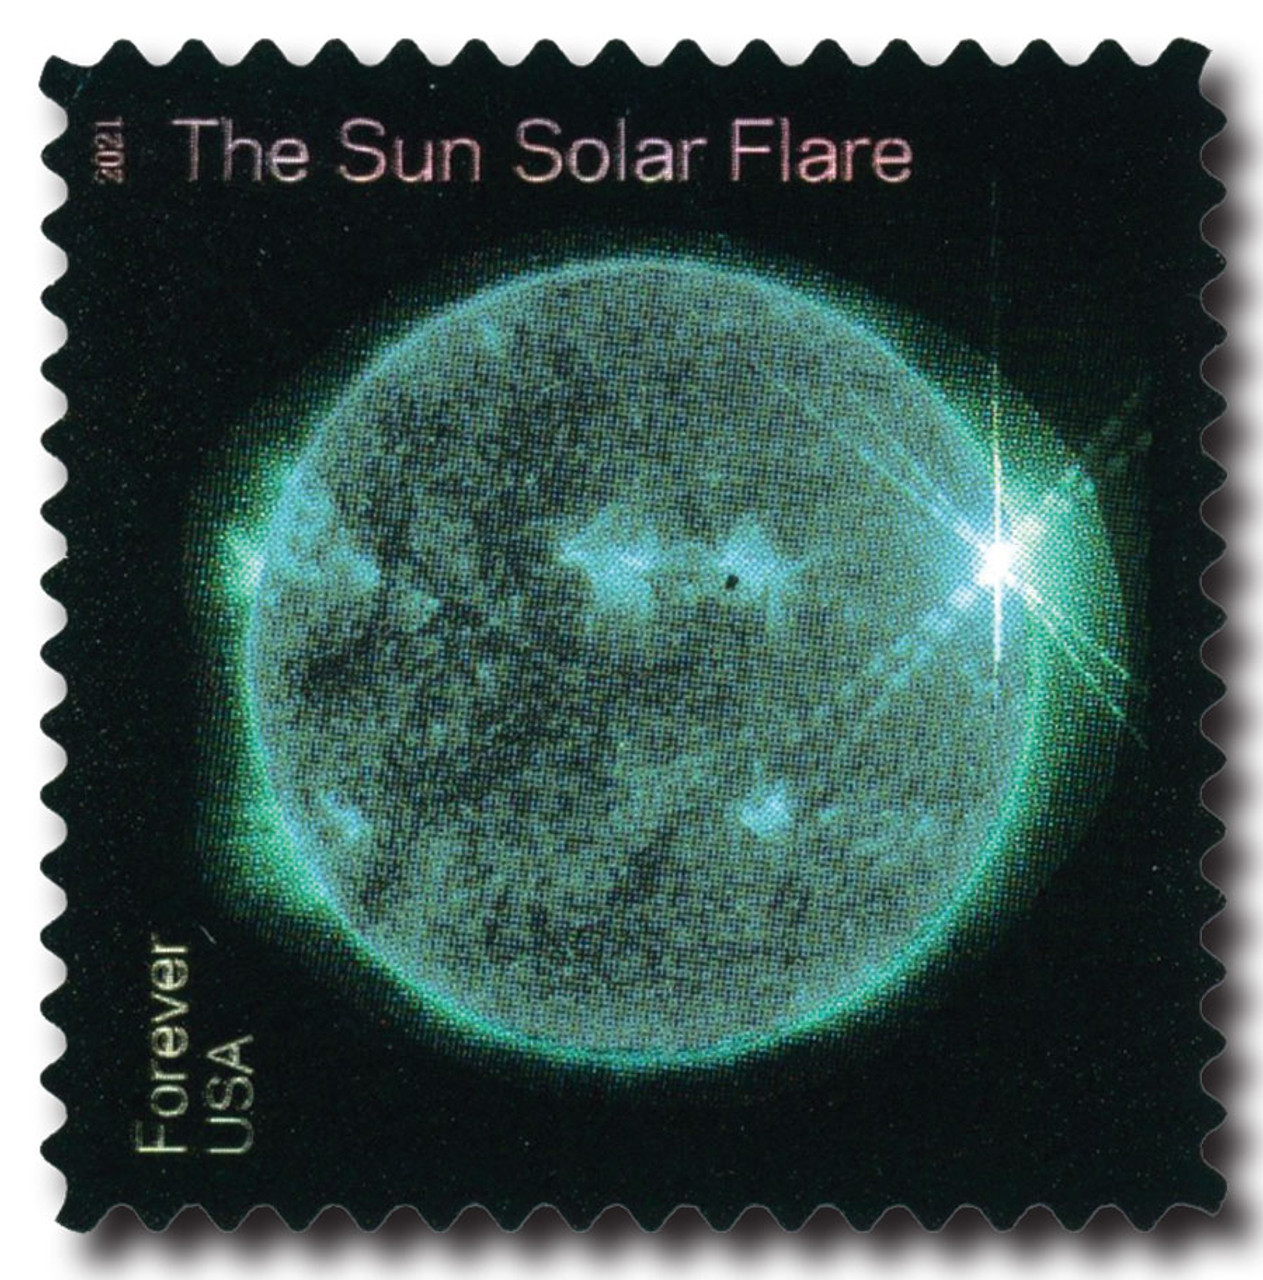 The U.S. Postal Service to Issue NASA Sun Science Forever Stamps - NASA